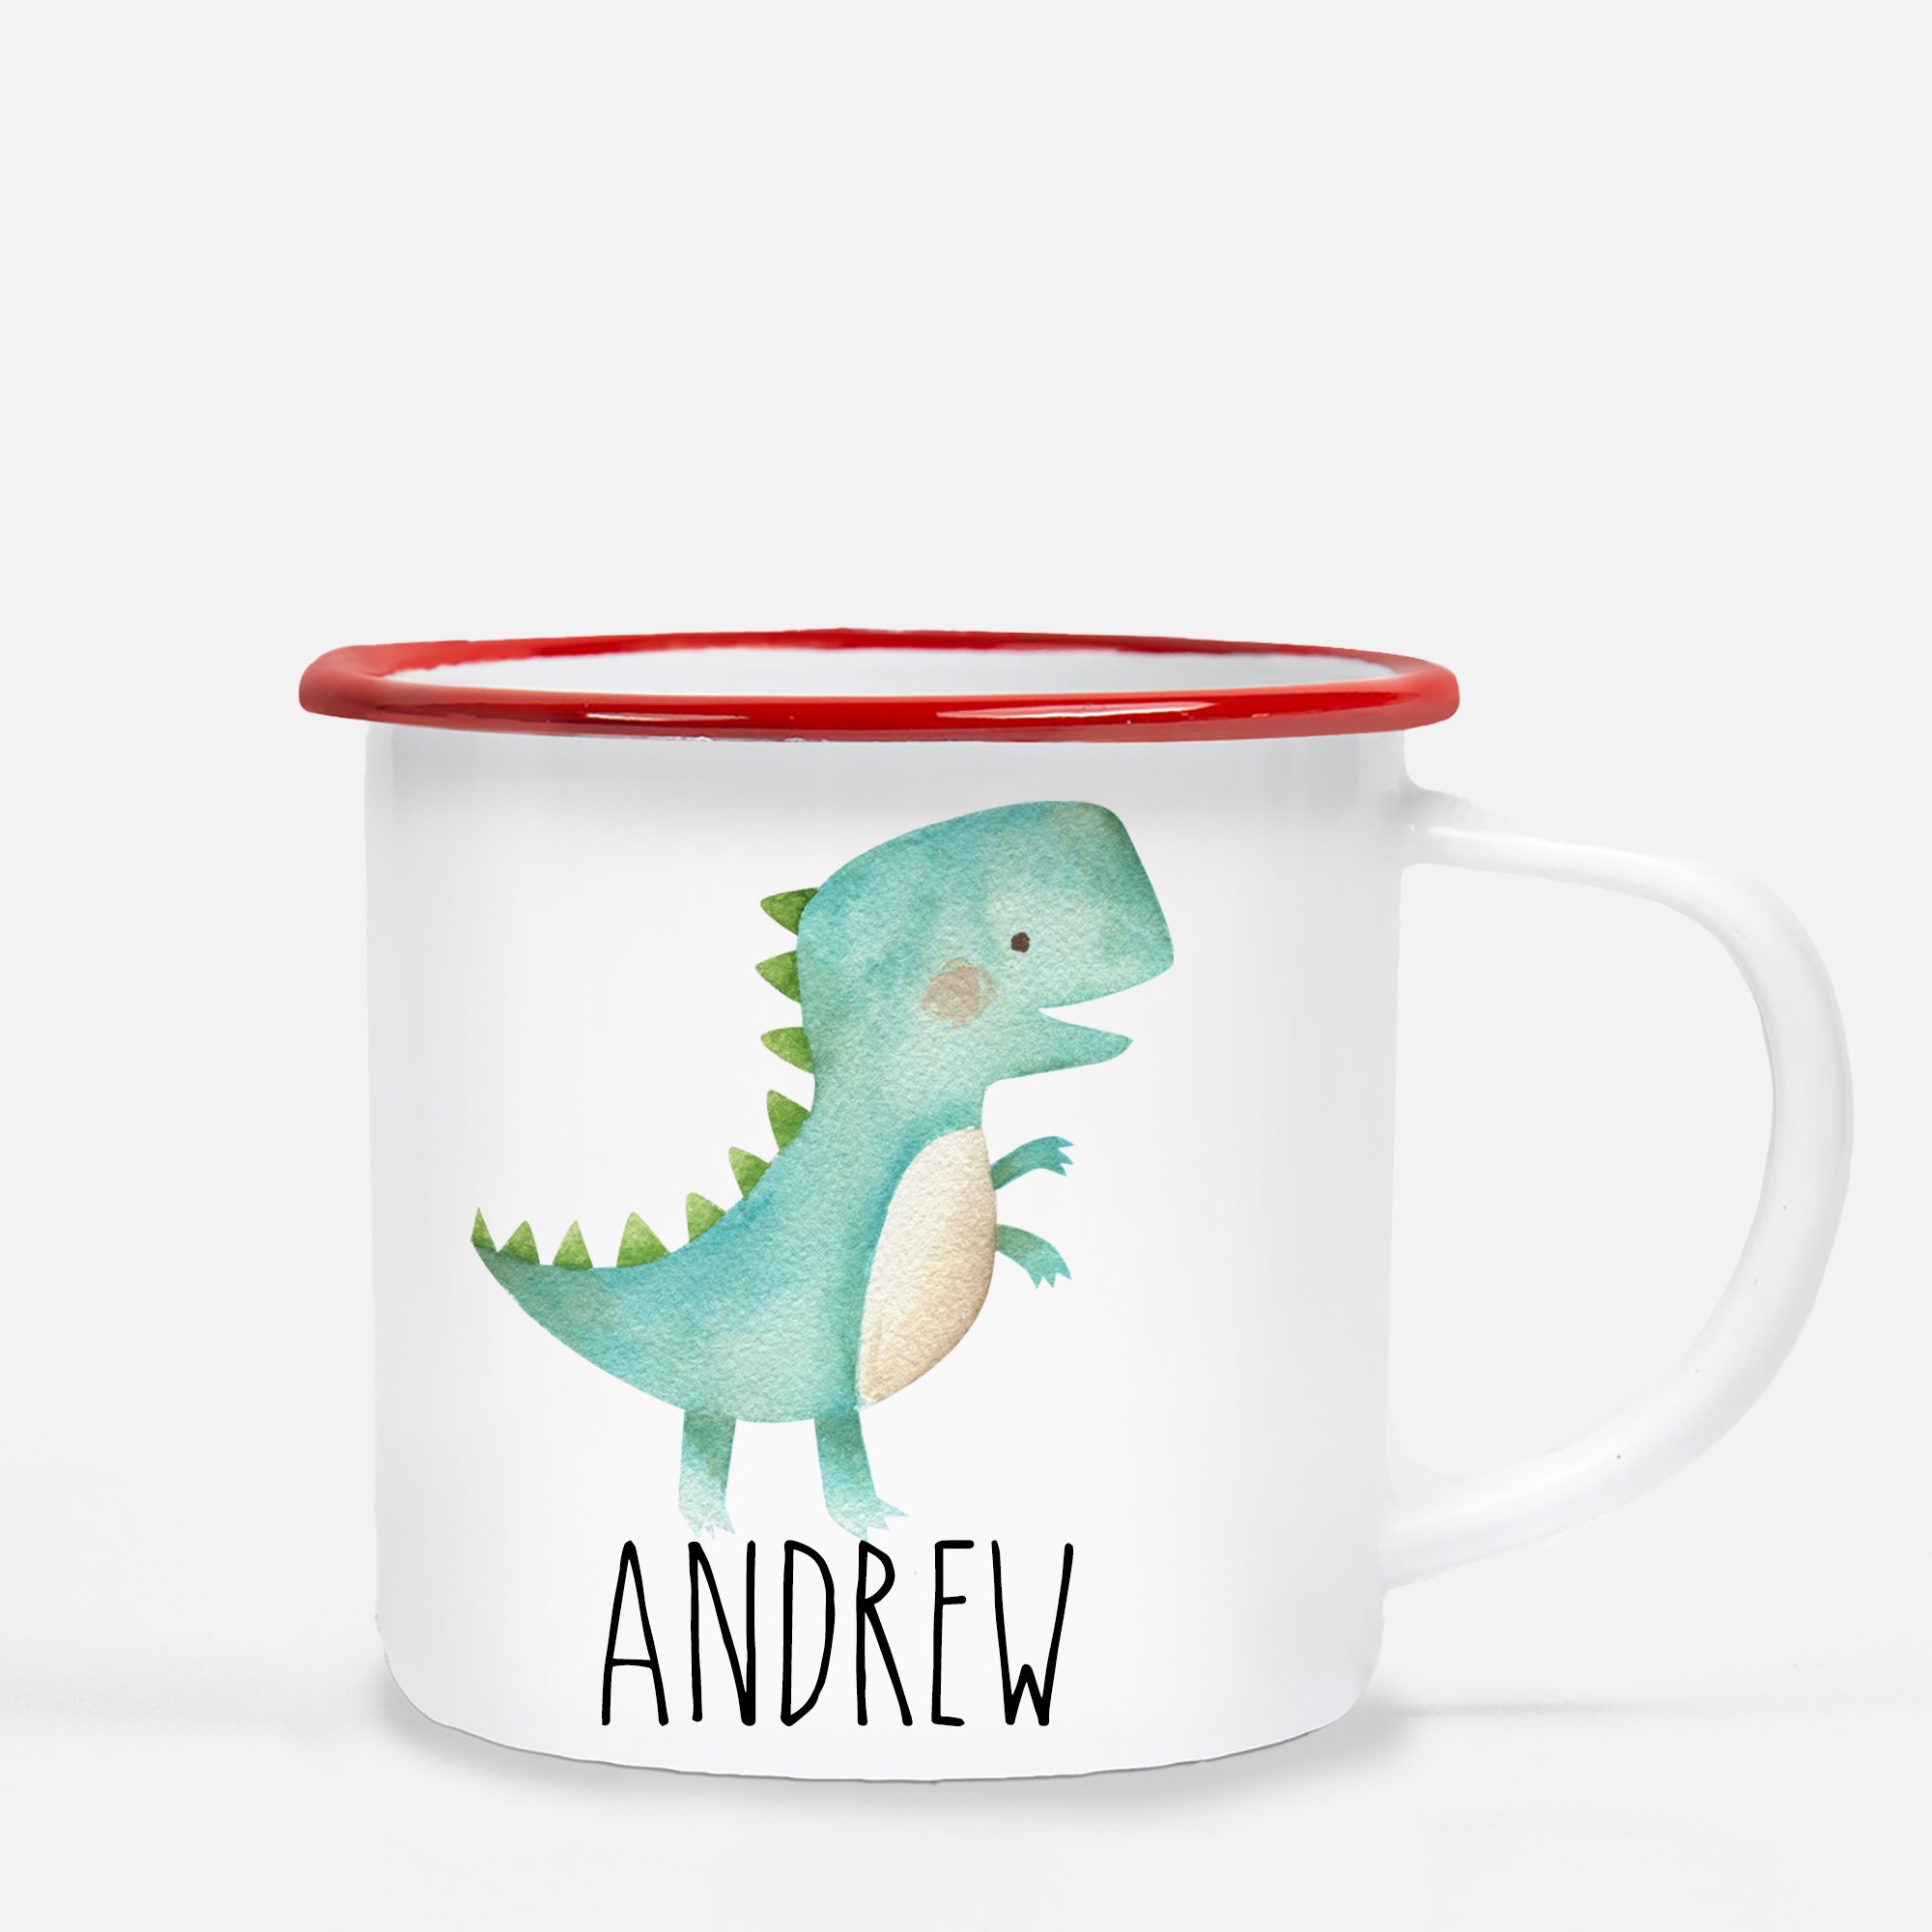 Dinosaur Camp Mug, Tyrannosaurus Rex, Personalized with your Child's name, PIPSY.COM, red lip